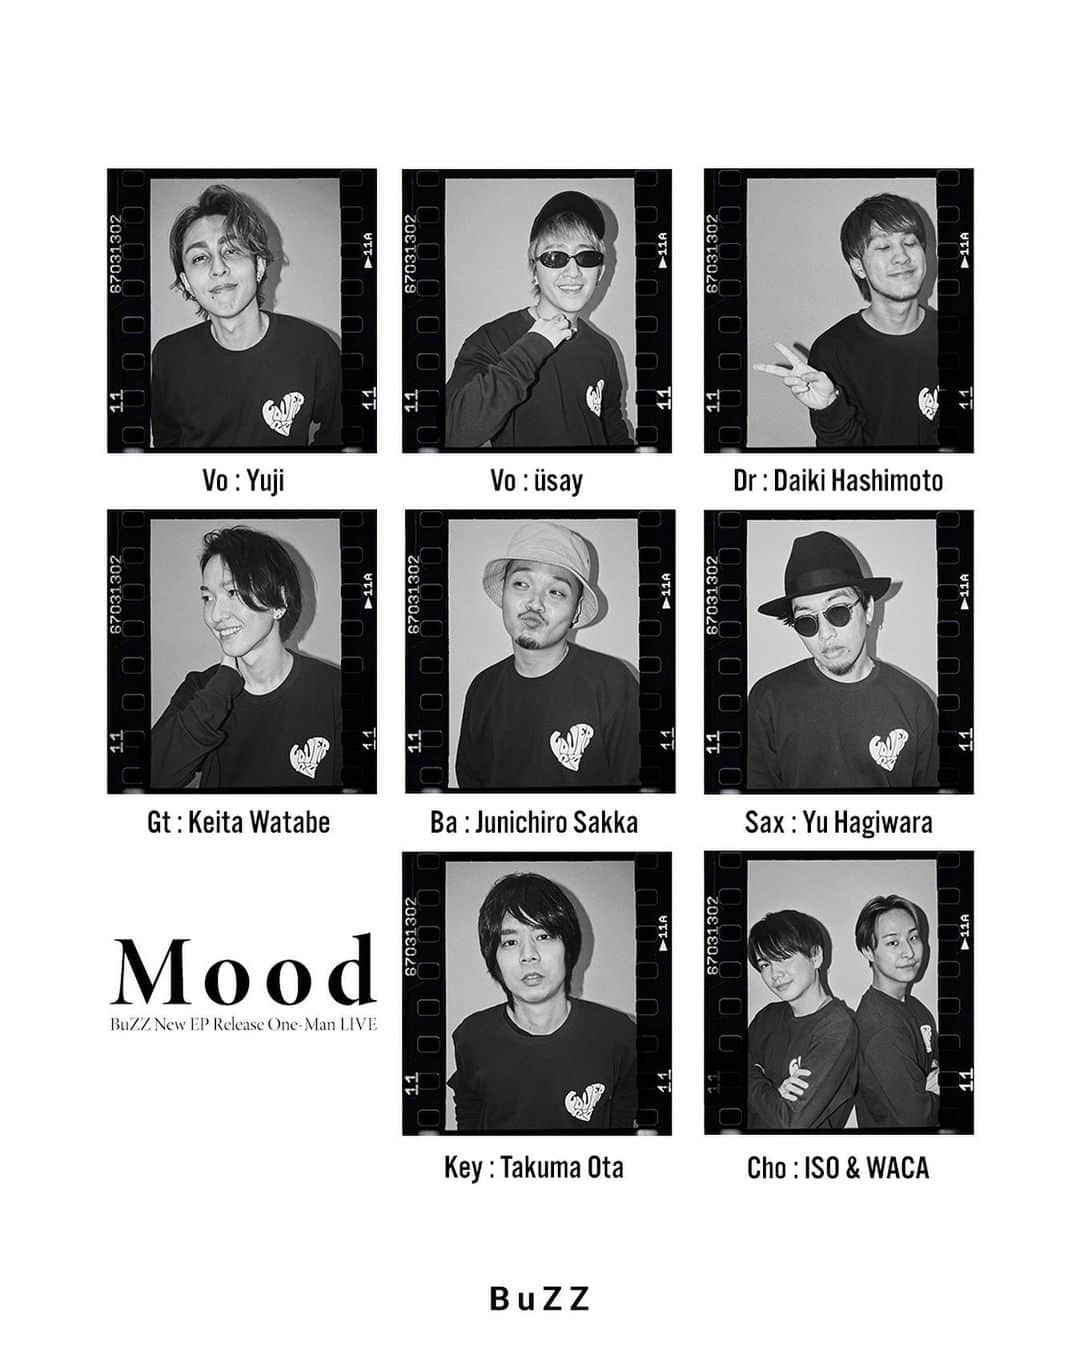 BuZZ【公式】のインスタグラム：「12.11 sun BuZZ New EP Release One-Man LIVE"Mood"  「BuZZ New EP Release One-Man LIVE "Mood"」 日程：2022年12月11日(日) 時間： 1部）OPEN 13:00 / START14:00 　　　 2部）OPEN 17:30 / START 18:30  会場：LDH kitchen THE TOKYO HANEDA 🎫Ticket 全チケット SOLD OUT プレミアムシート：10,000円 一般席：6,000円  #BuZZJP」